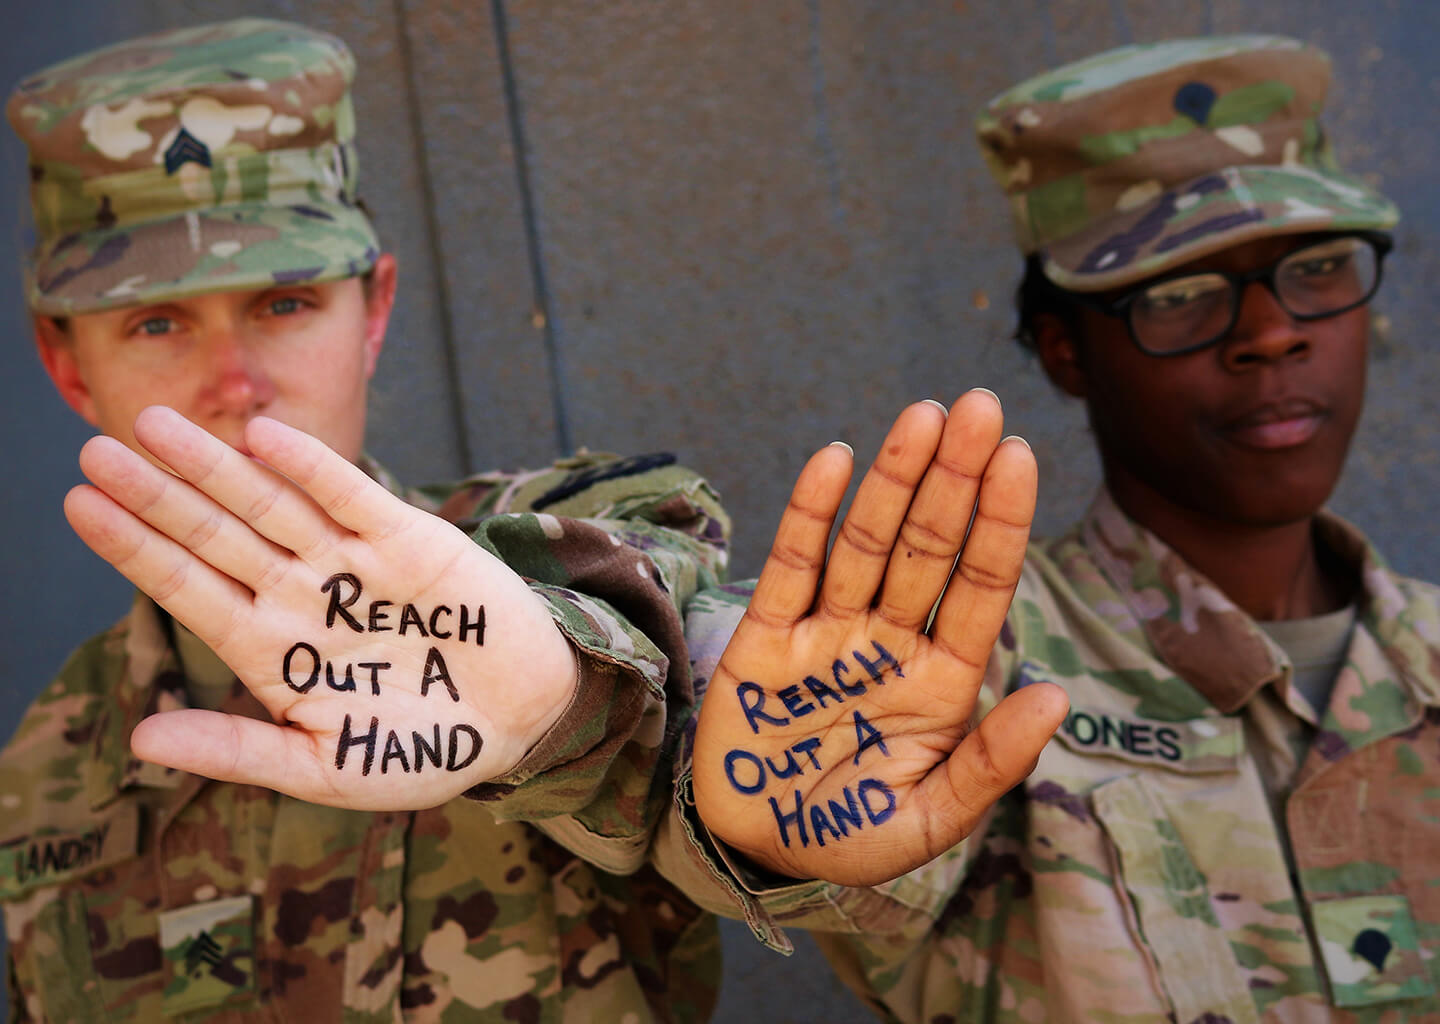 Army Sgt. Rebecca Landry and Spc. Asia Jones highlight the importance of suicide prevention and awareness at Camp Taji, Iraq, in 2019. Photo by Sgt. Roger Jackson.